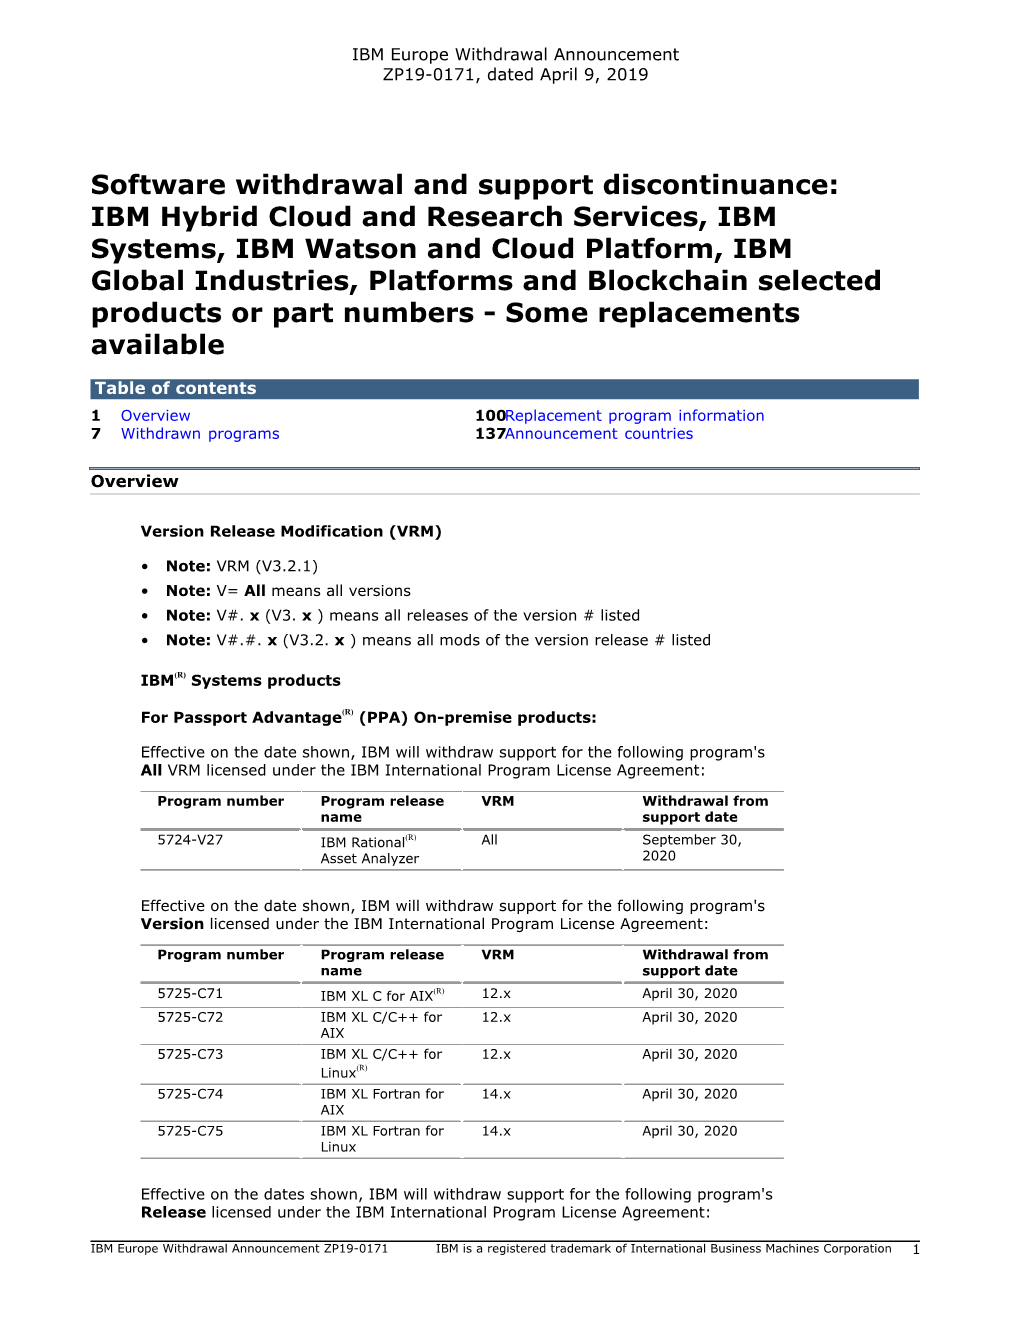 IBM Informix Software Withdrawal and Support Discontinuance